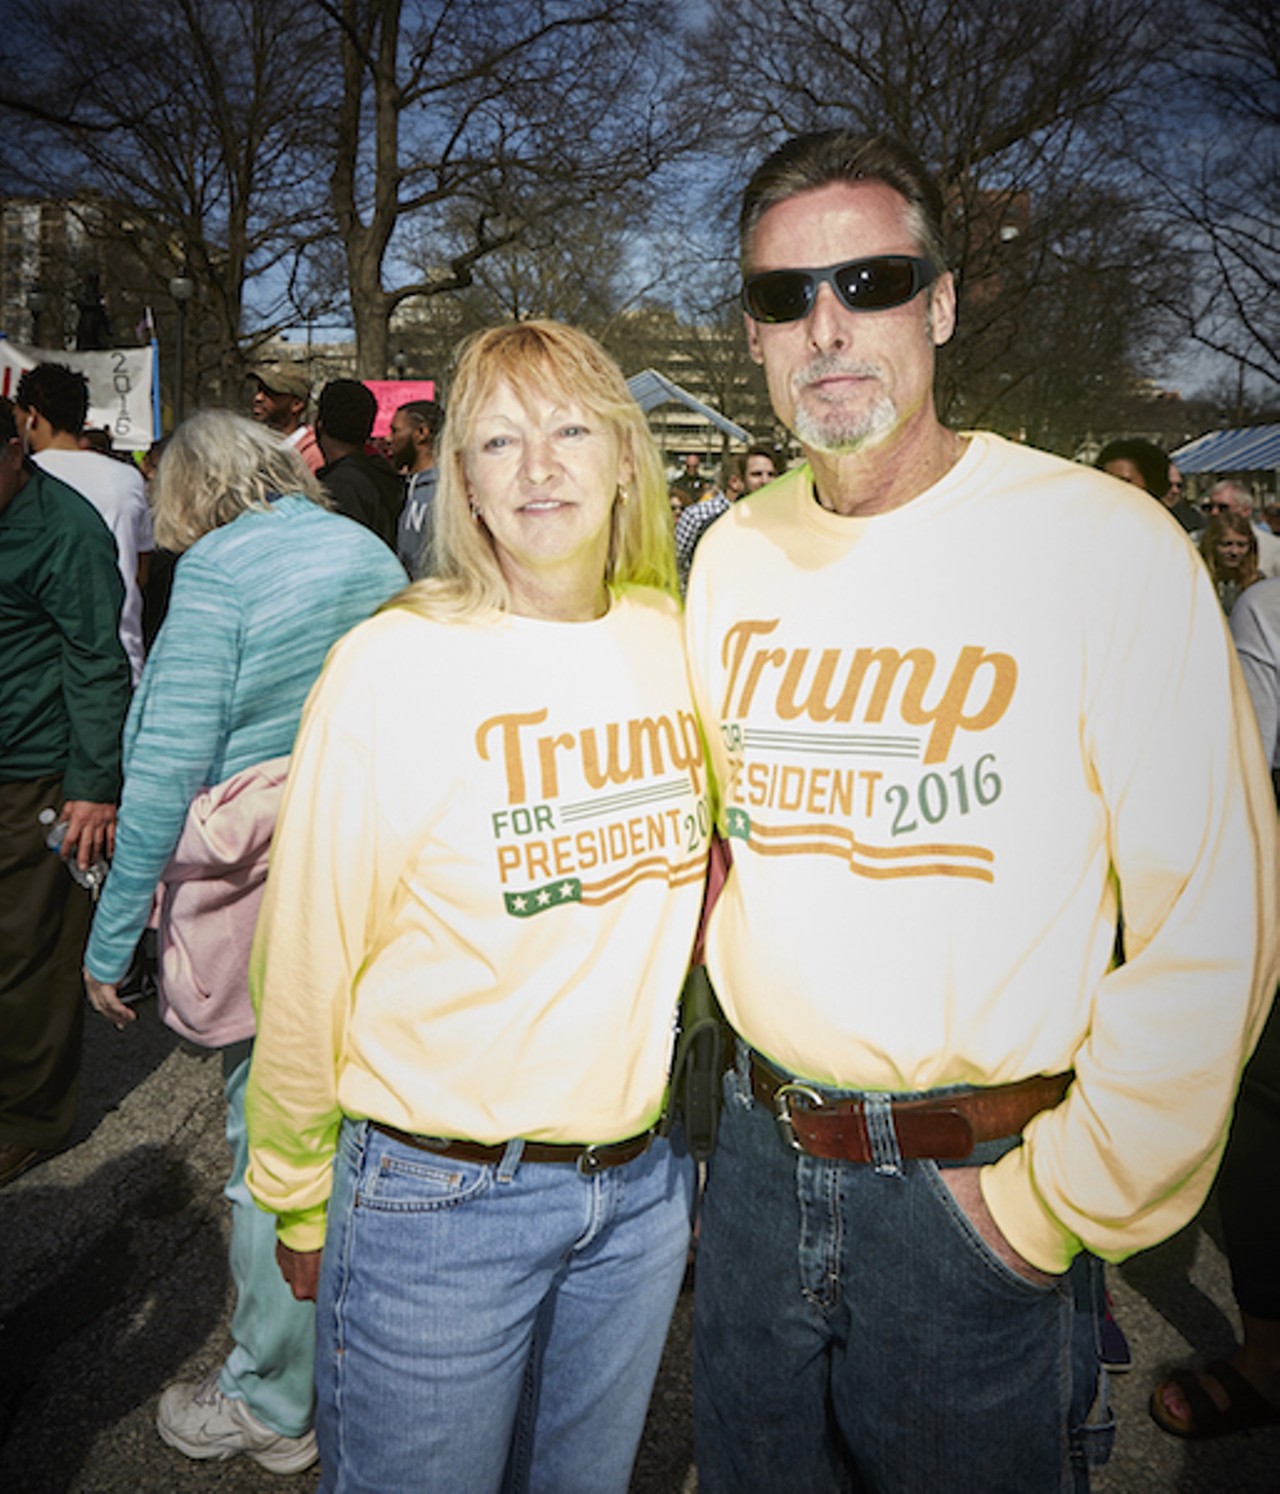 Here Are the St. Louisans Who Want Donald Trump to Make America Great Again